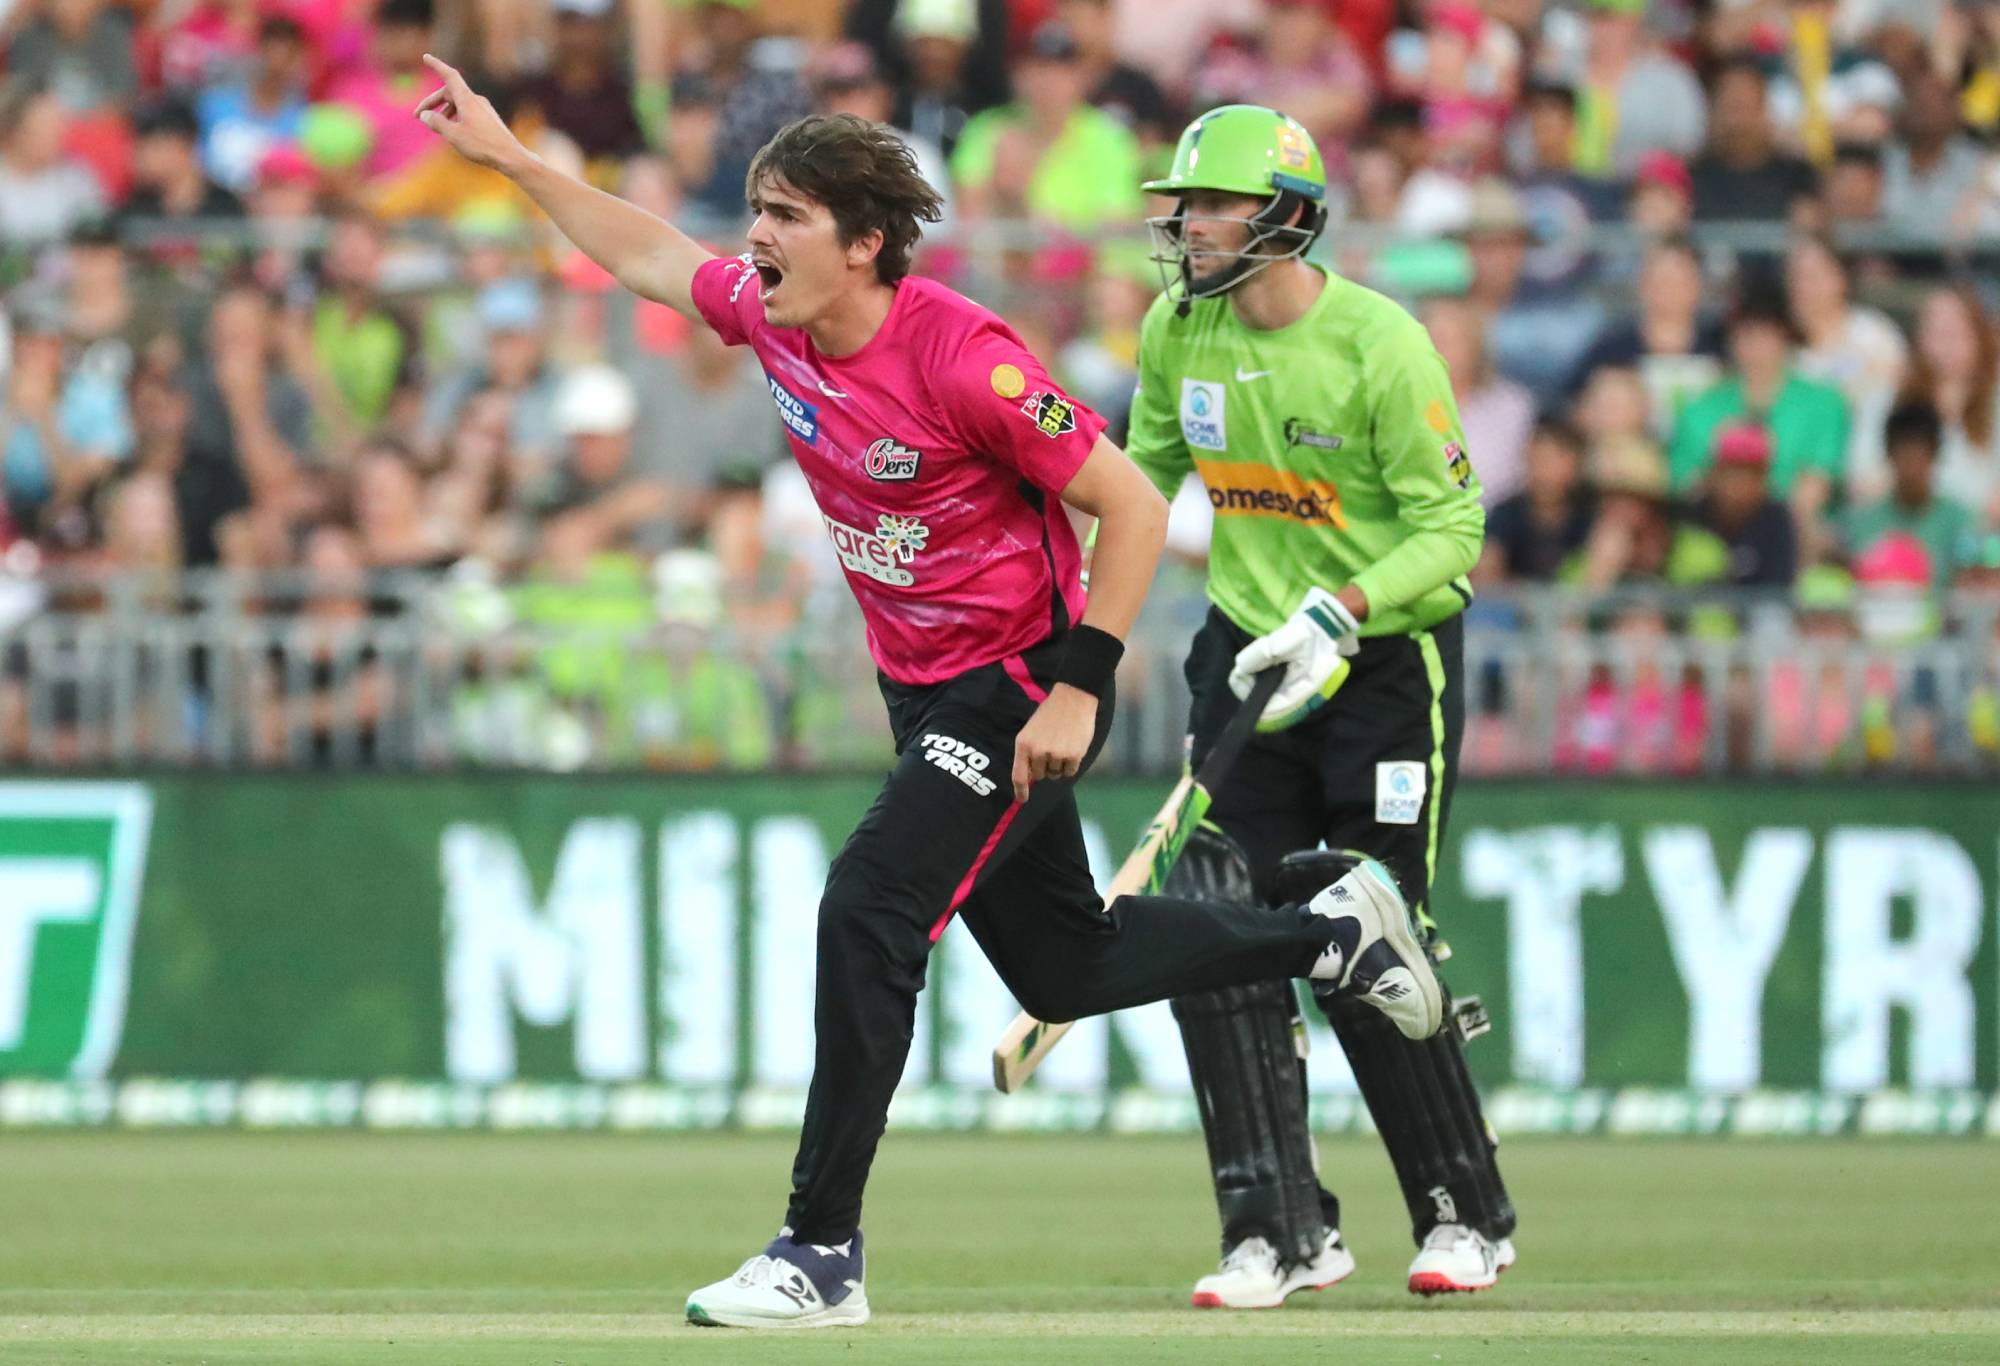 SYDNEY, AUSTRALIA - JANUARY 08: Sean Abbott of the Sixers appeals during the Men's Big Bash League match between the Sydney Thunder and the Sydney Sixers at Sydney Showground Stadium, on January 08, 2023, in Sydney, Australia. (Photo by Jeremy Ng/Getty Images)